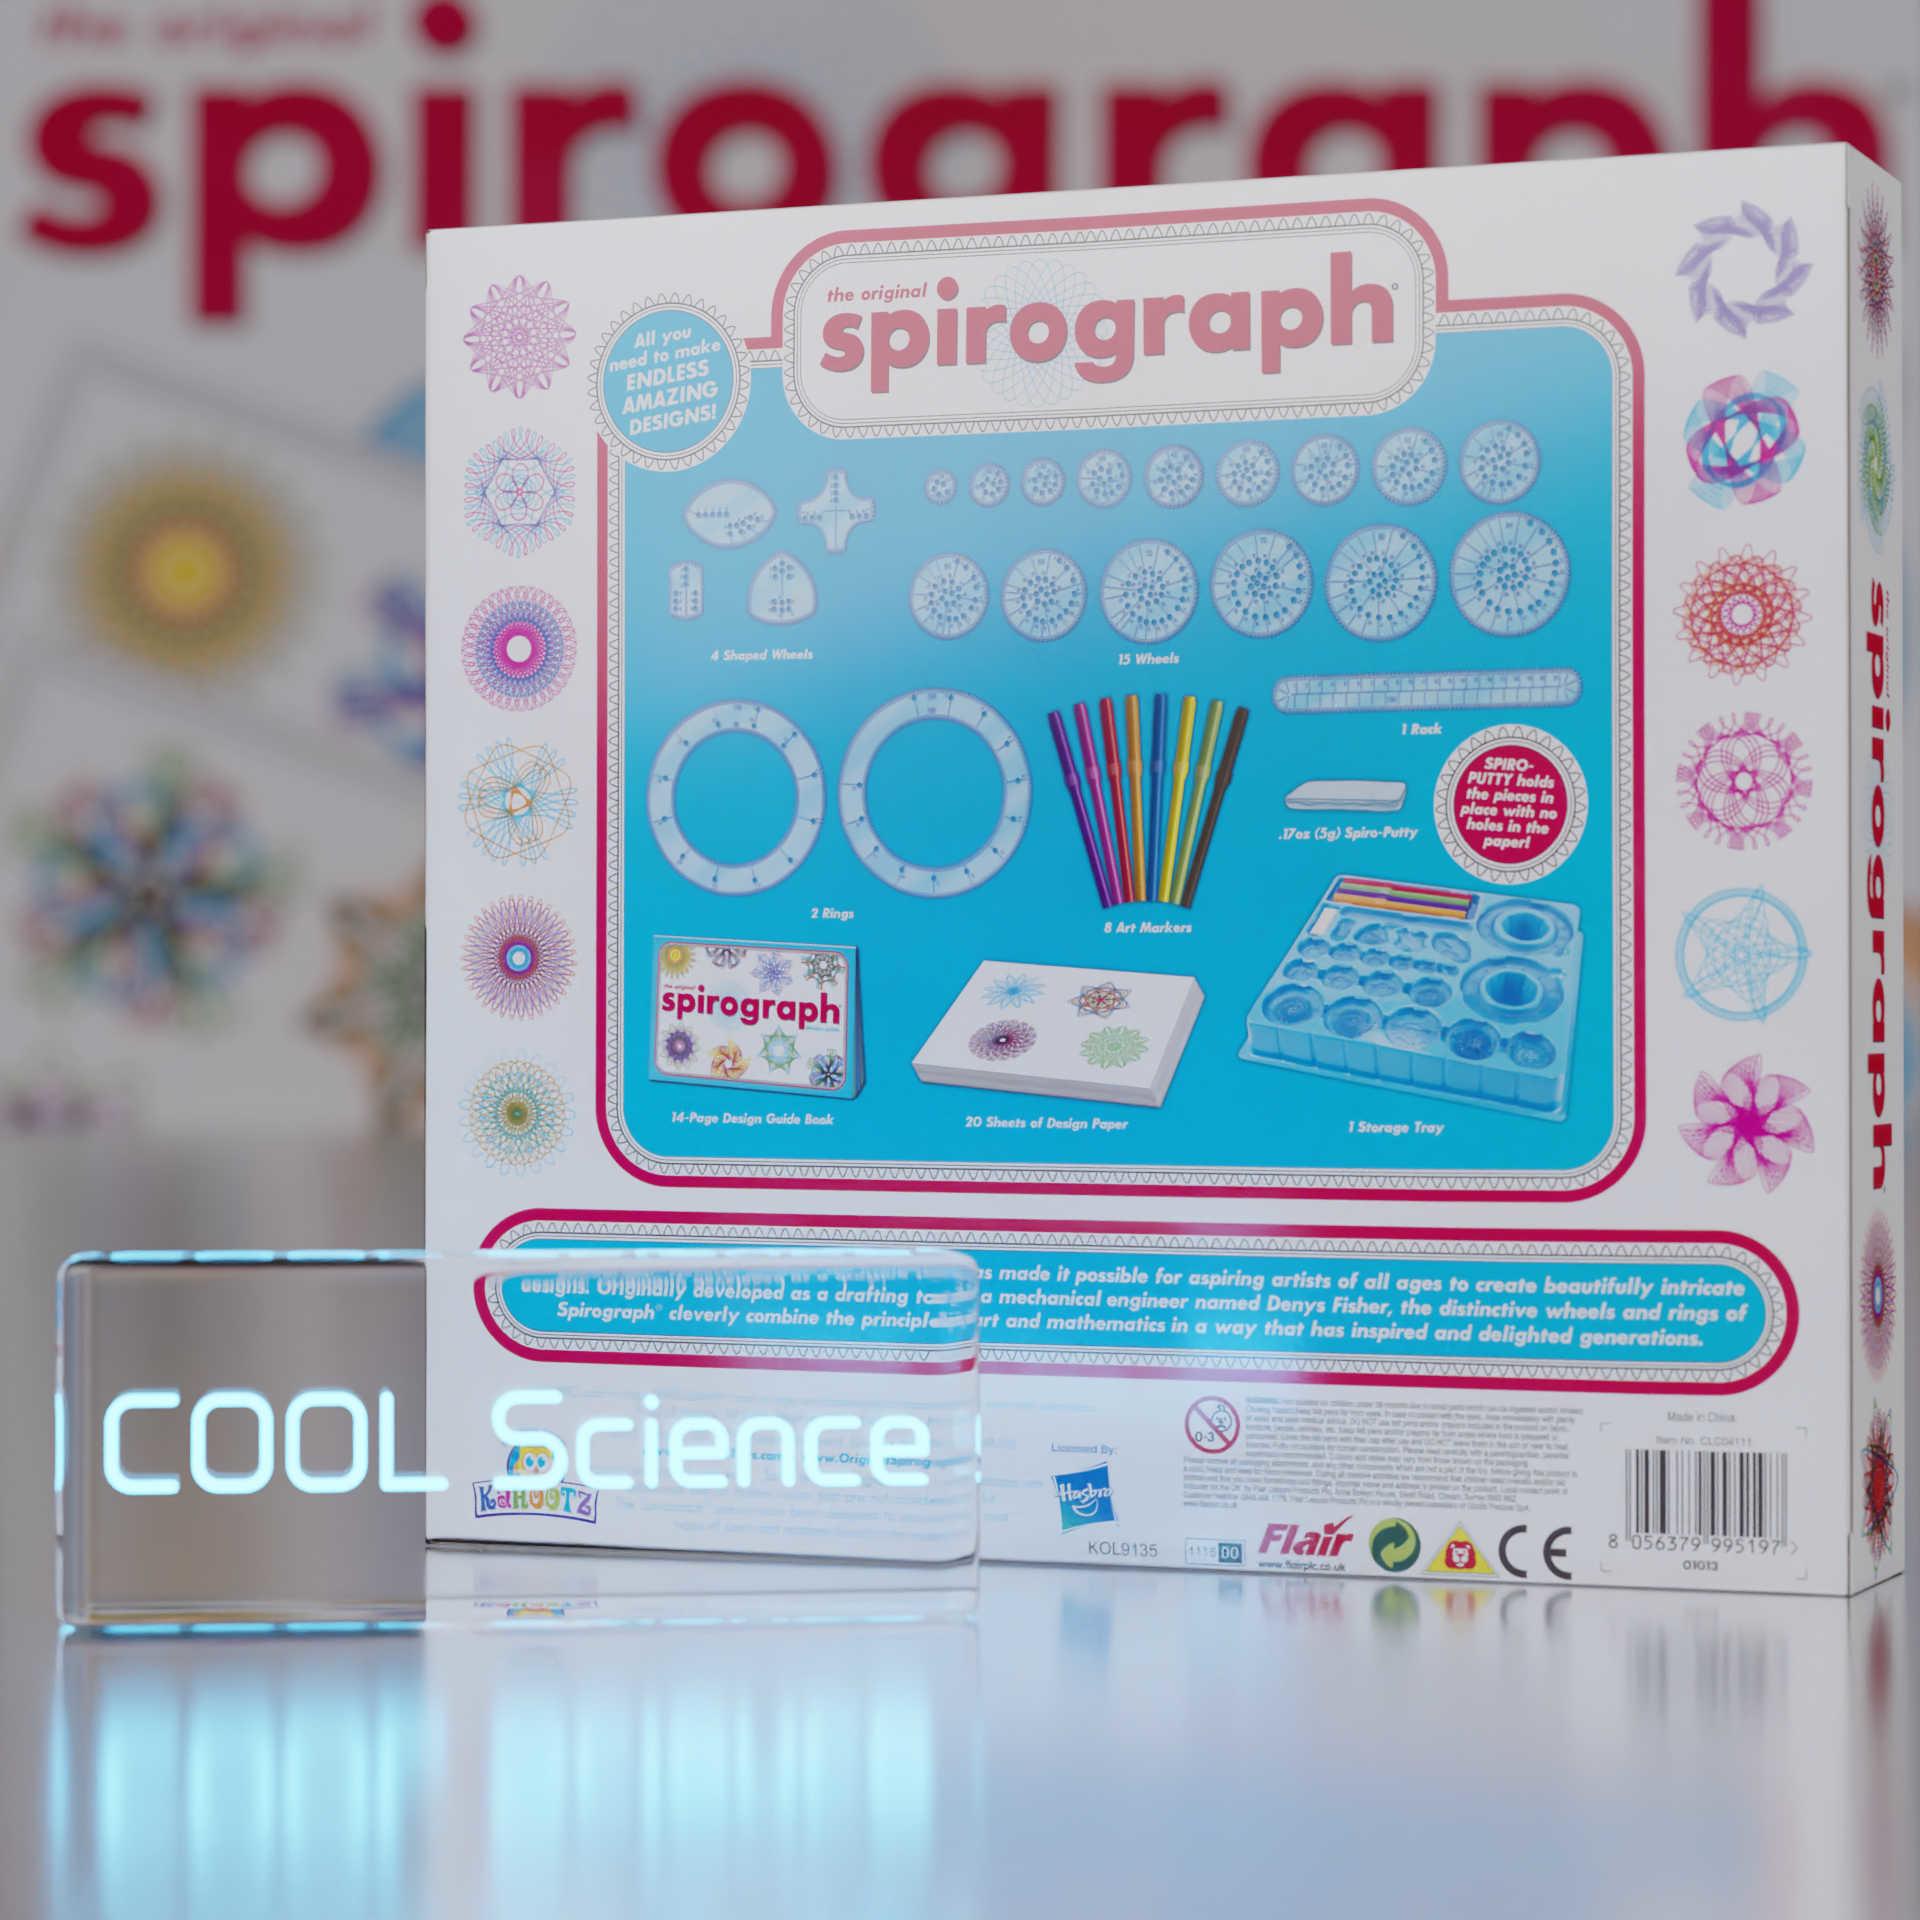 Back View of The Original Spirograph Set with Markers box